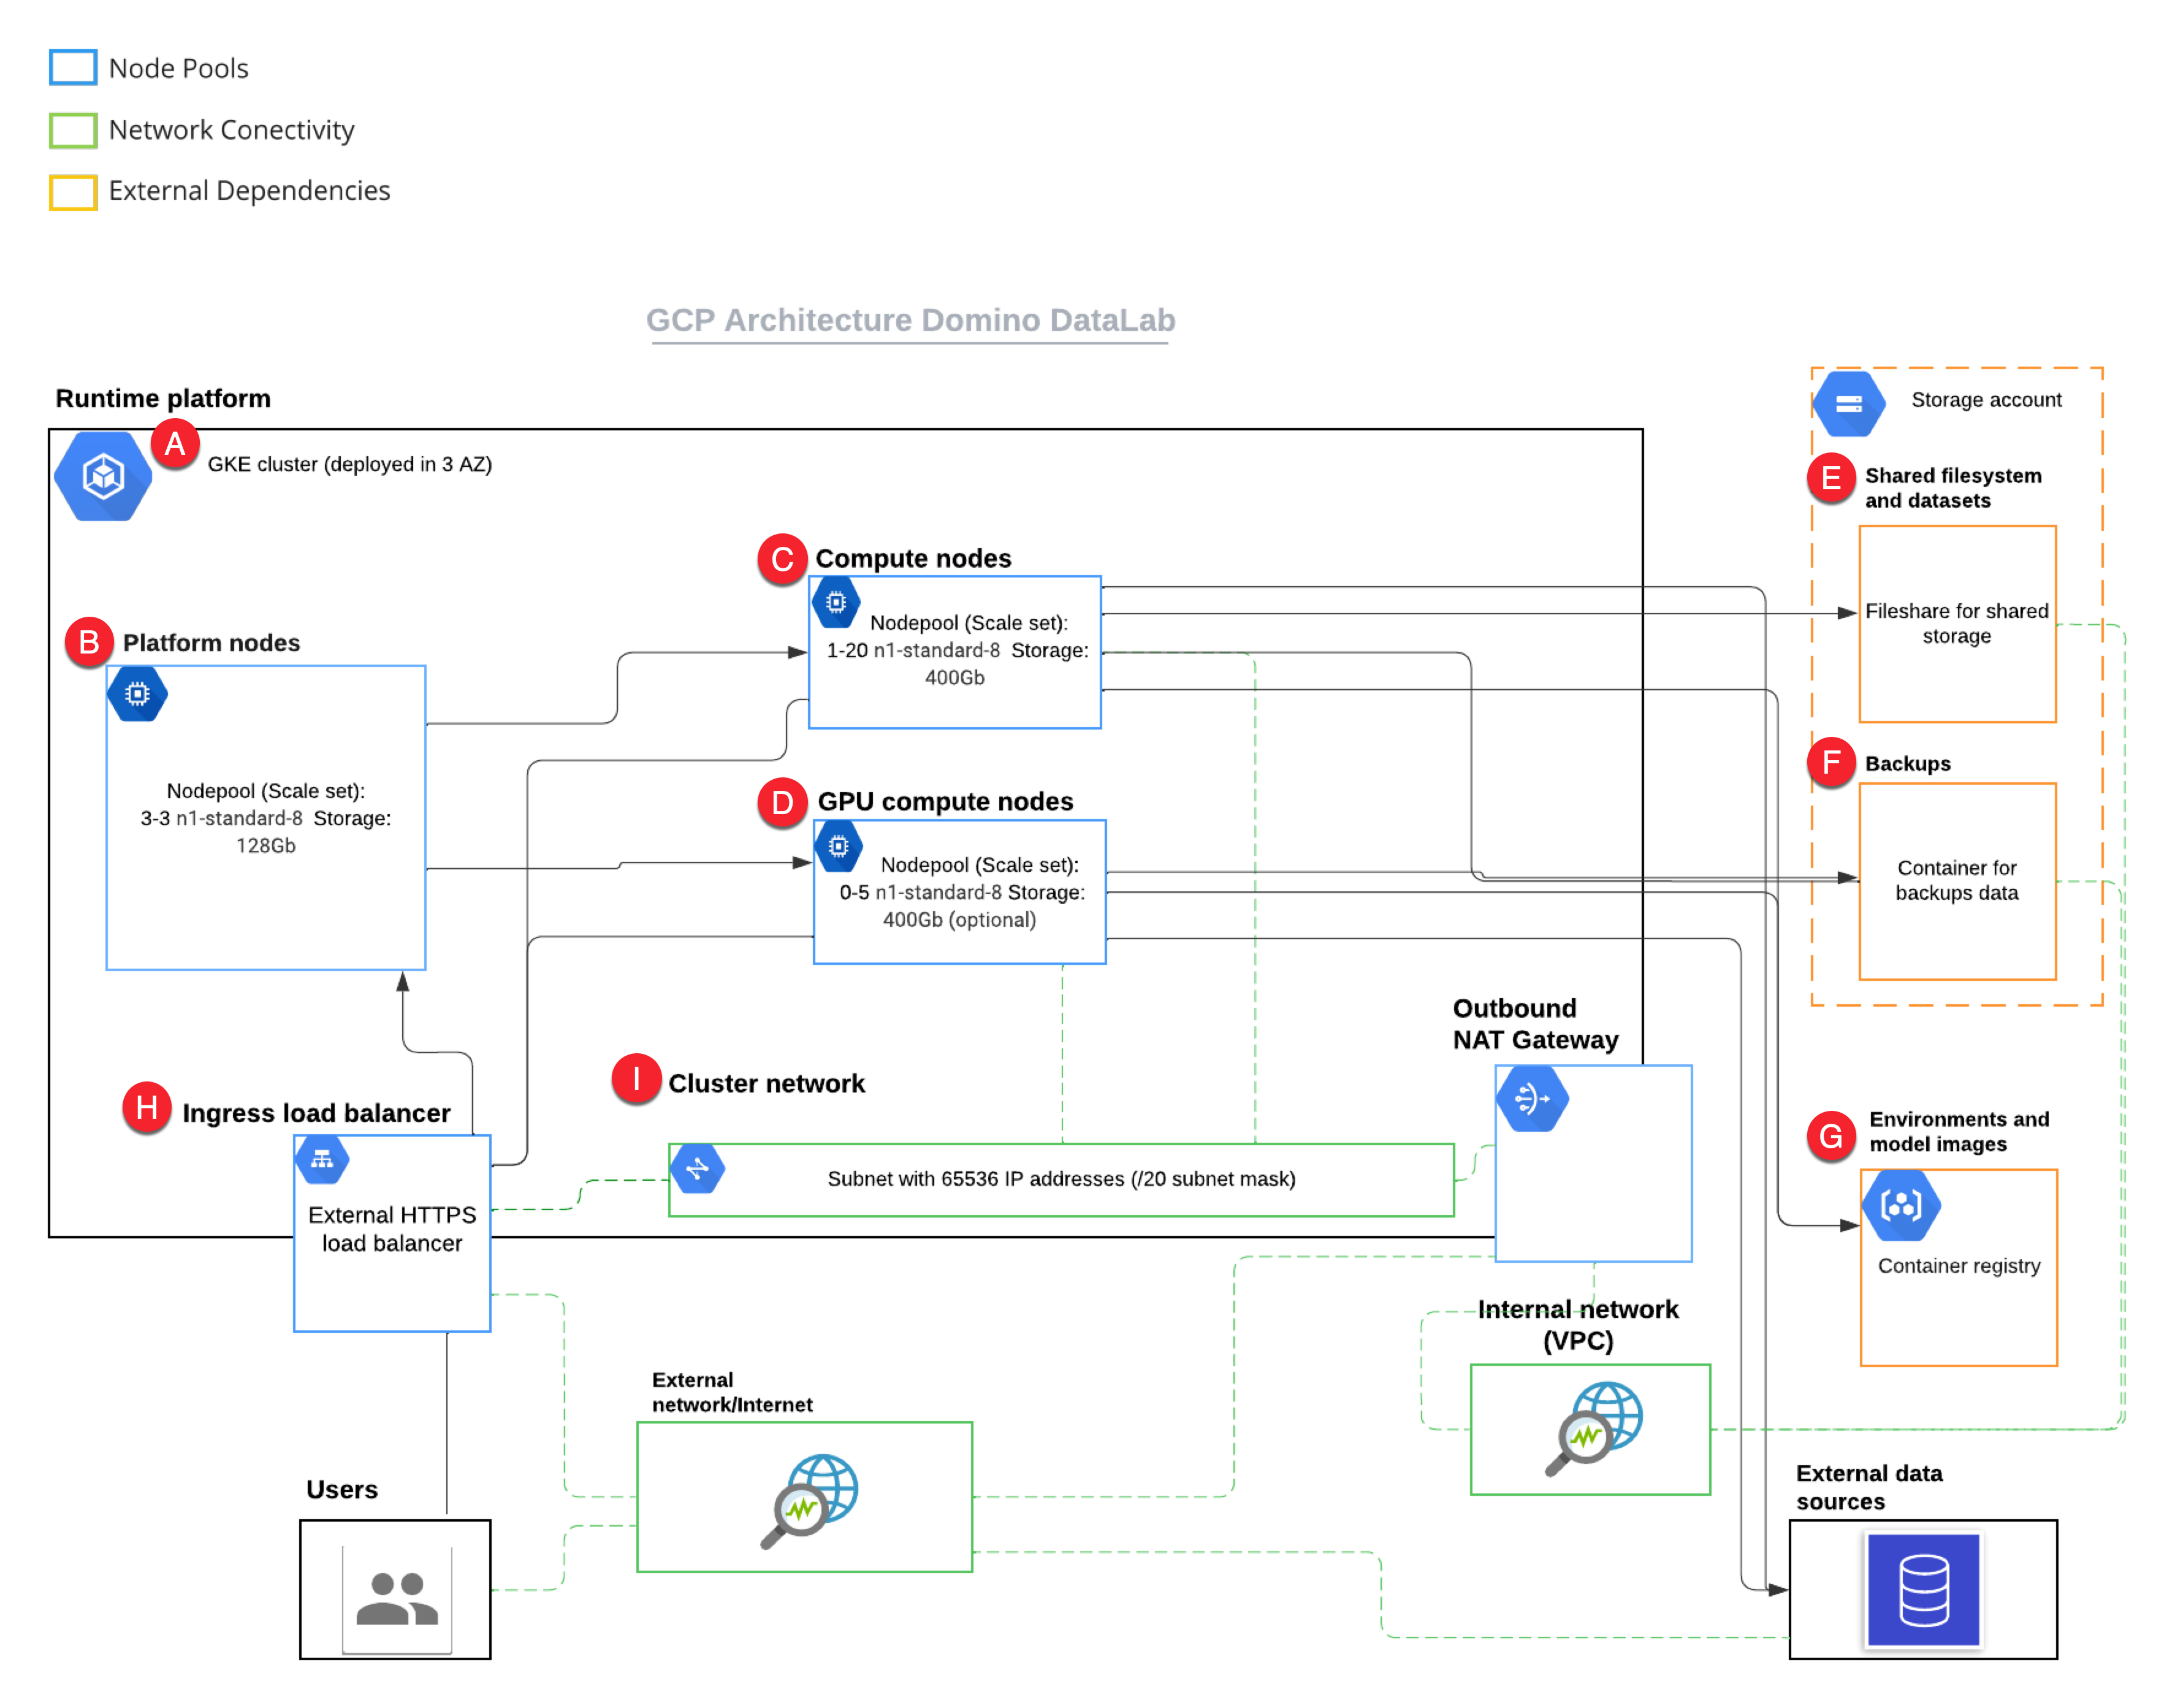 A map of the Google Cloud architecture you’ll need to set up a Domino deployment